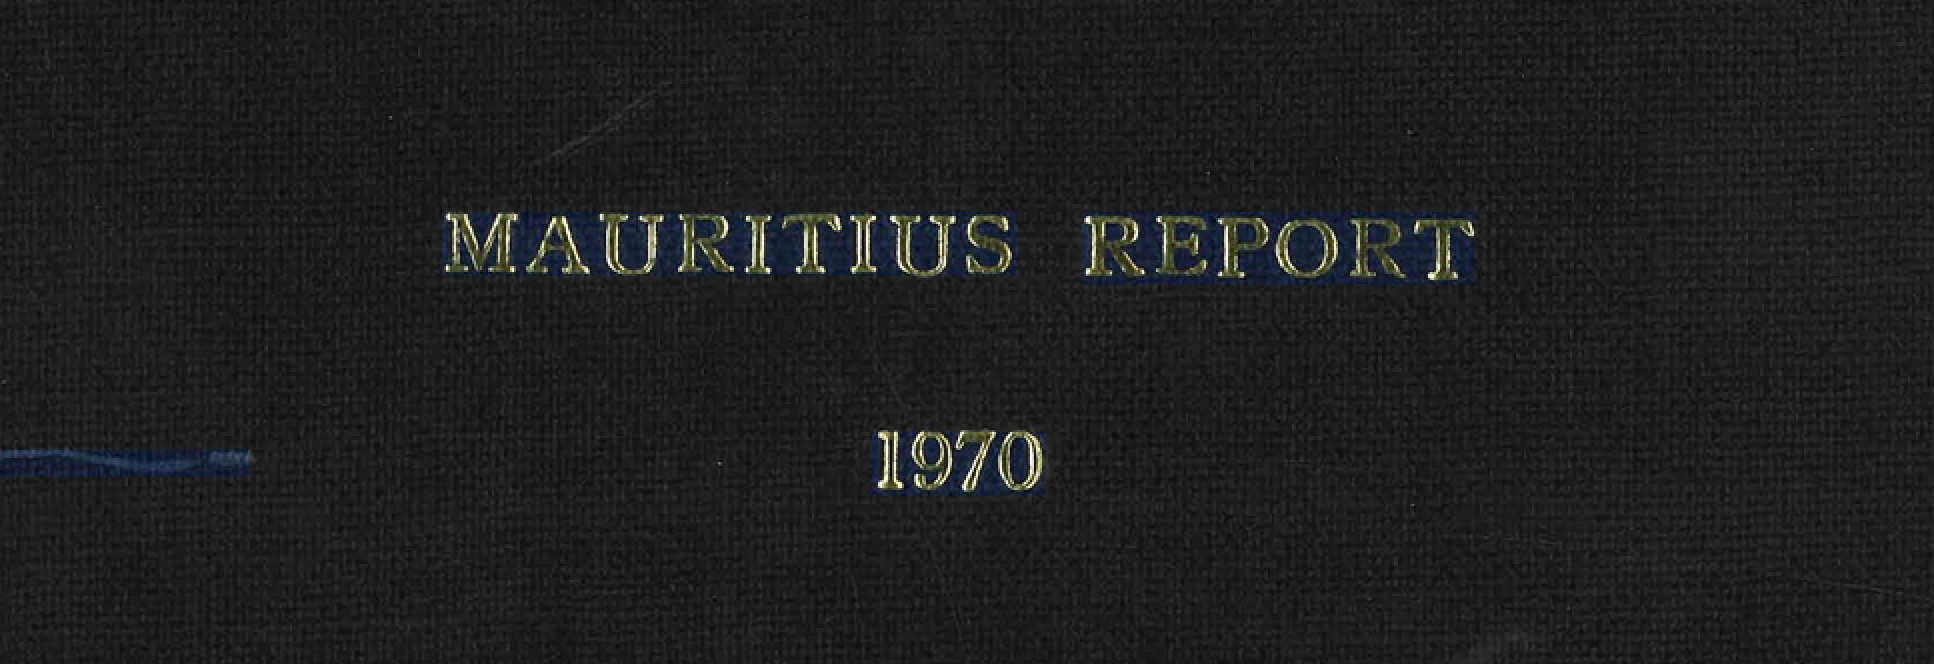 Report cover (detail)